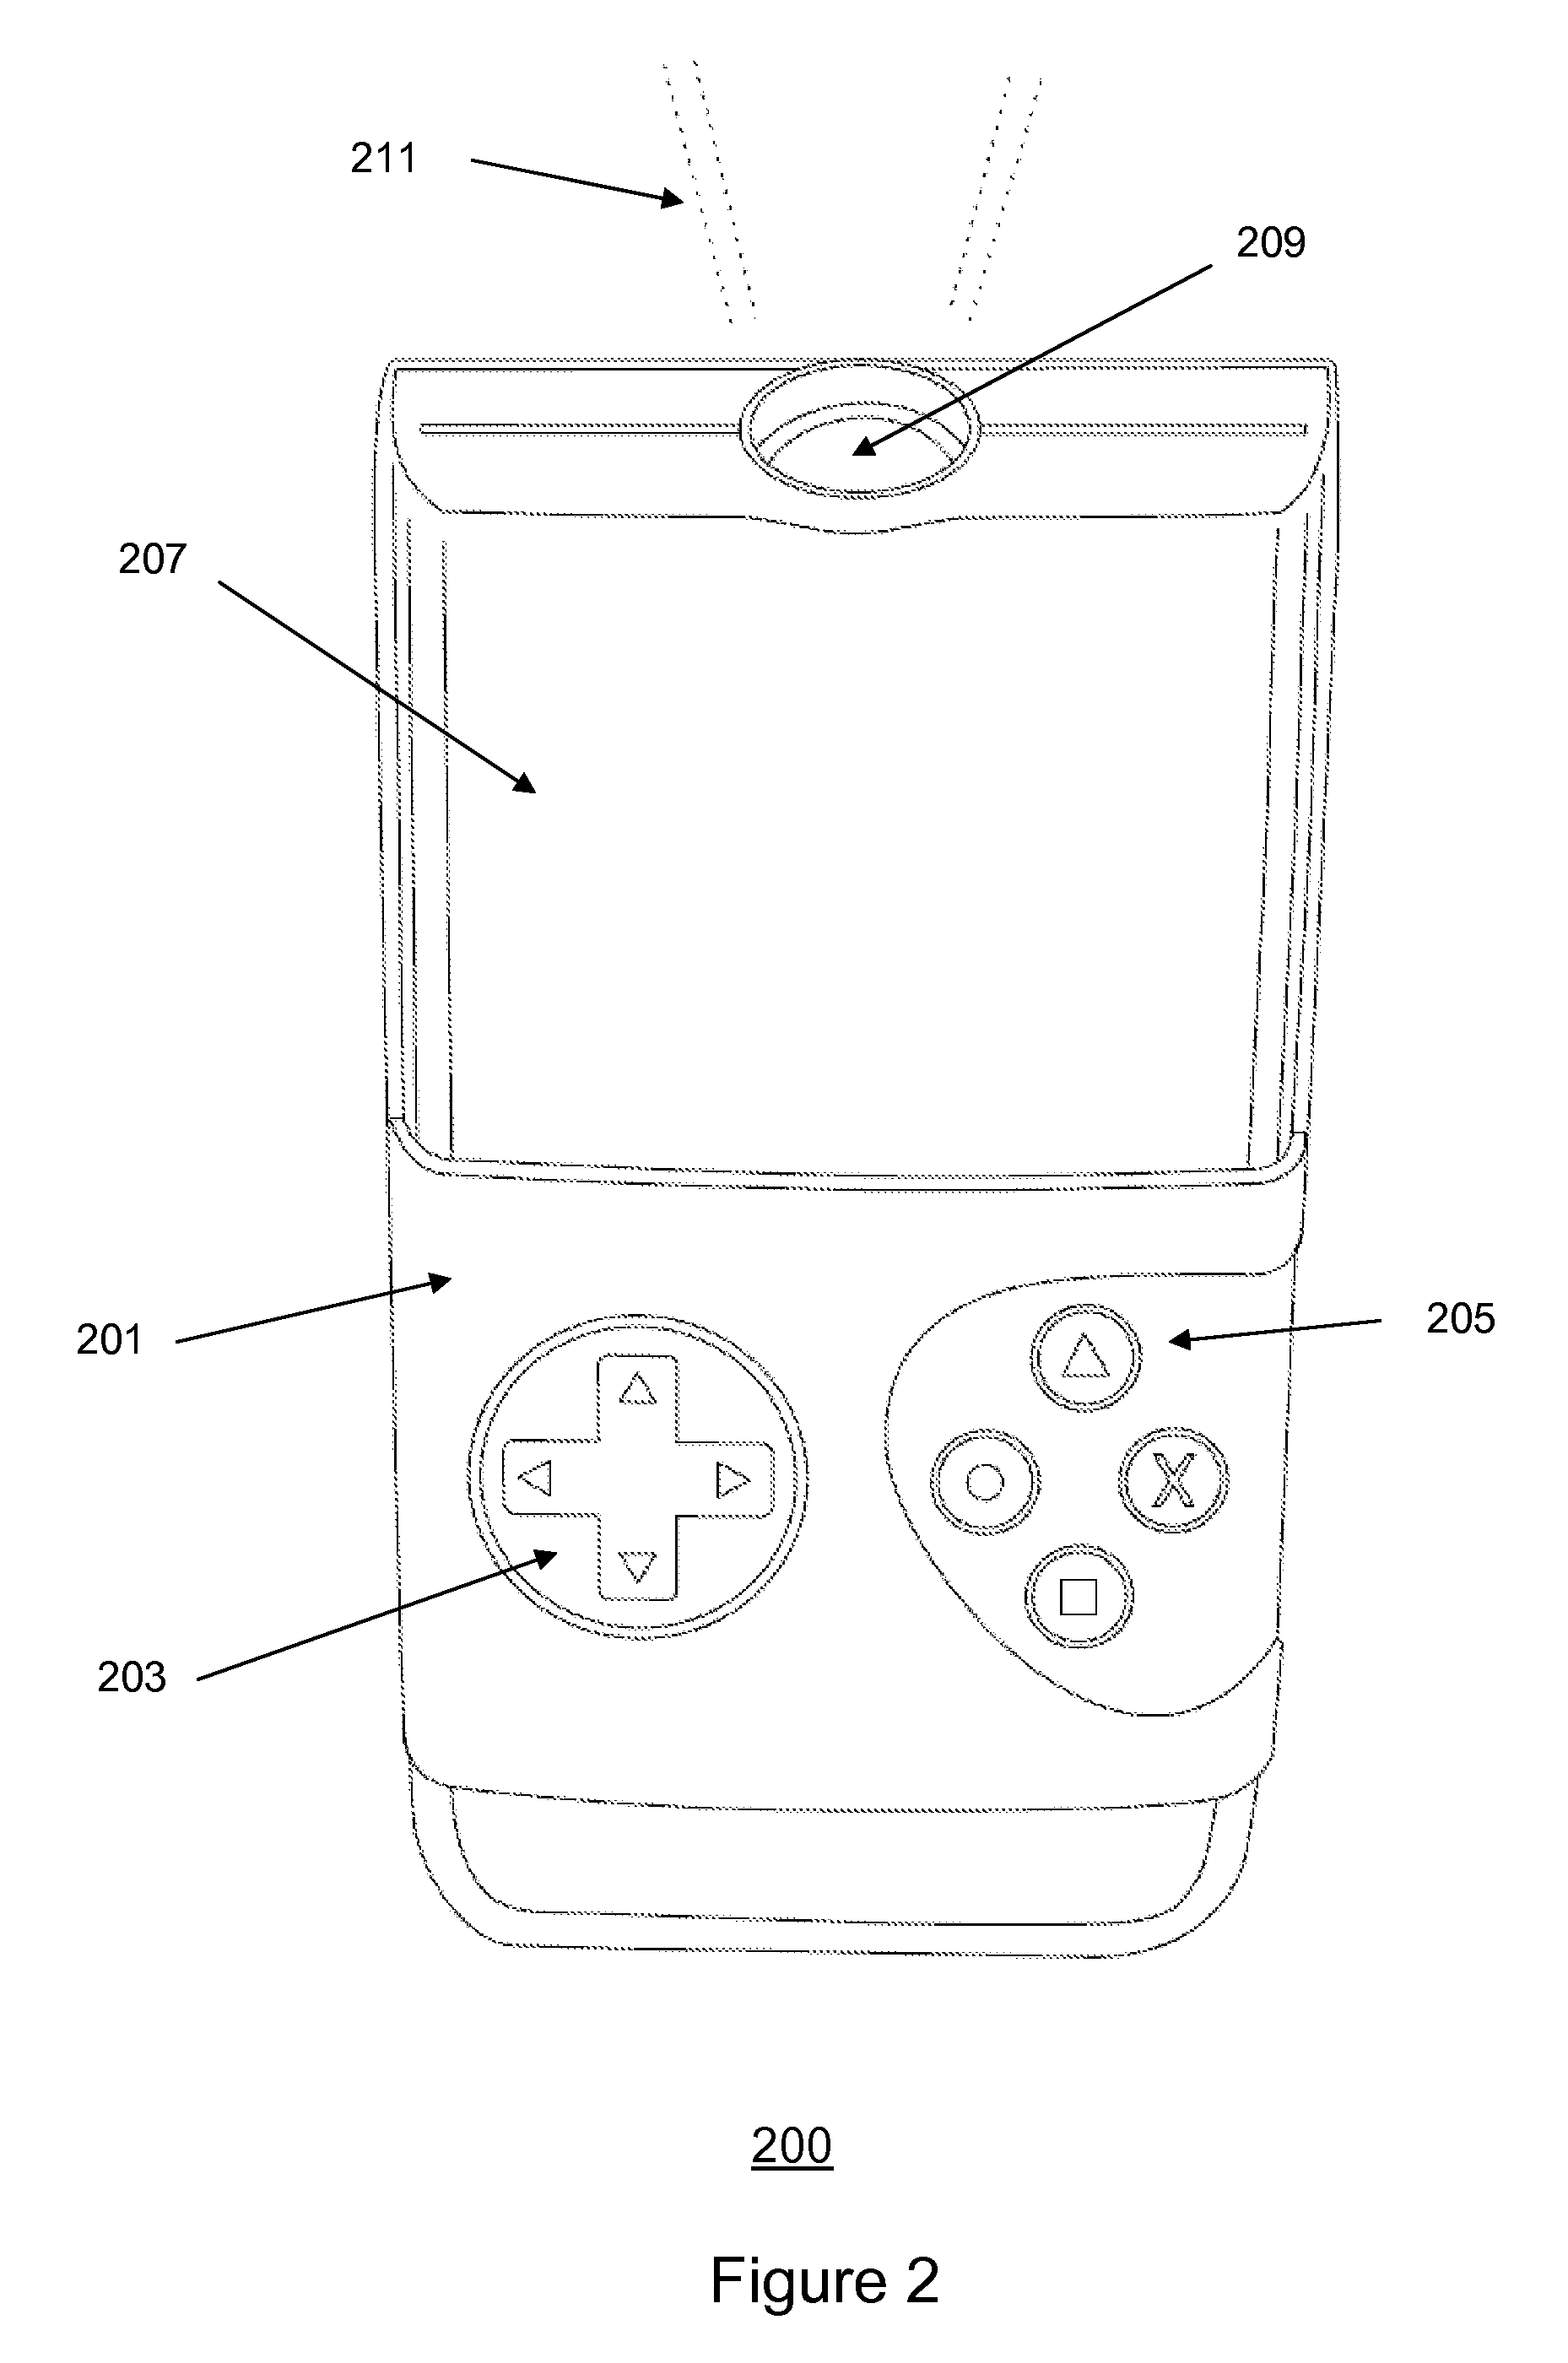 Apparatus and method for using a dedicated game interface on a wireless communication device with projector capability